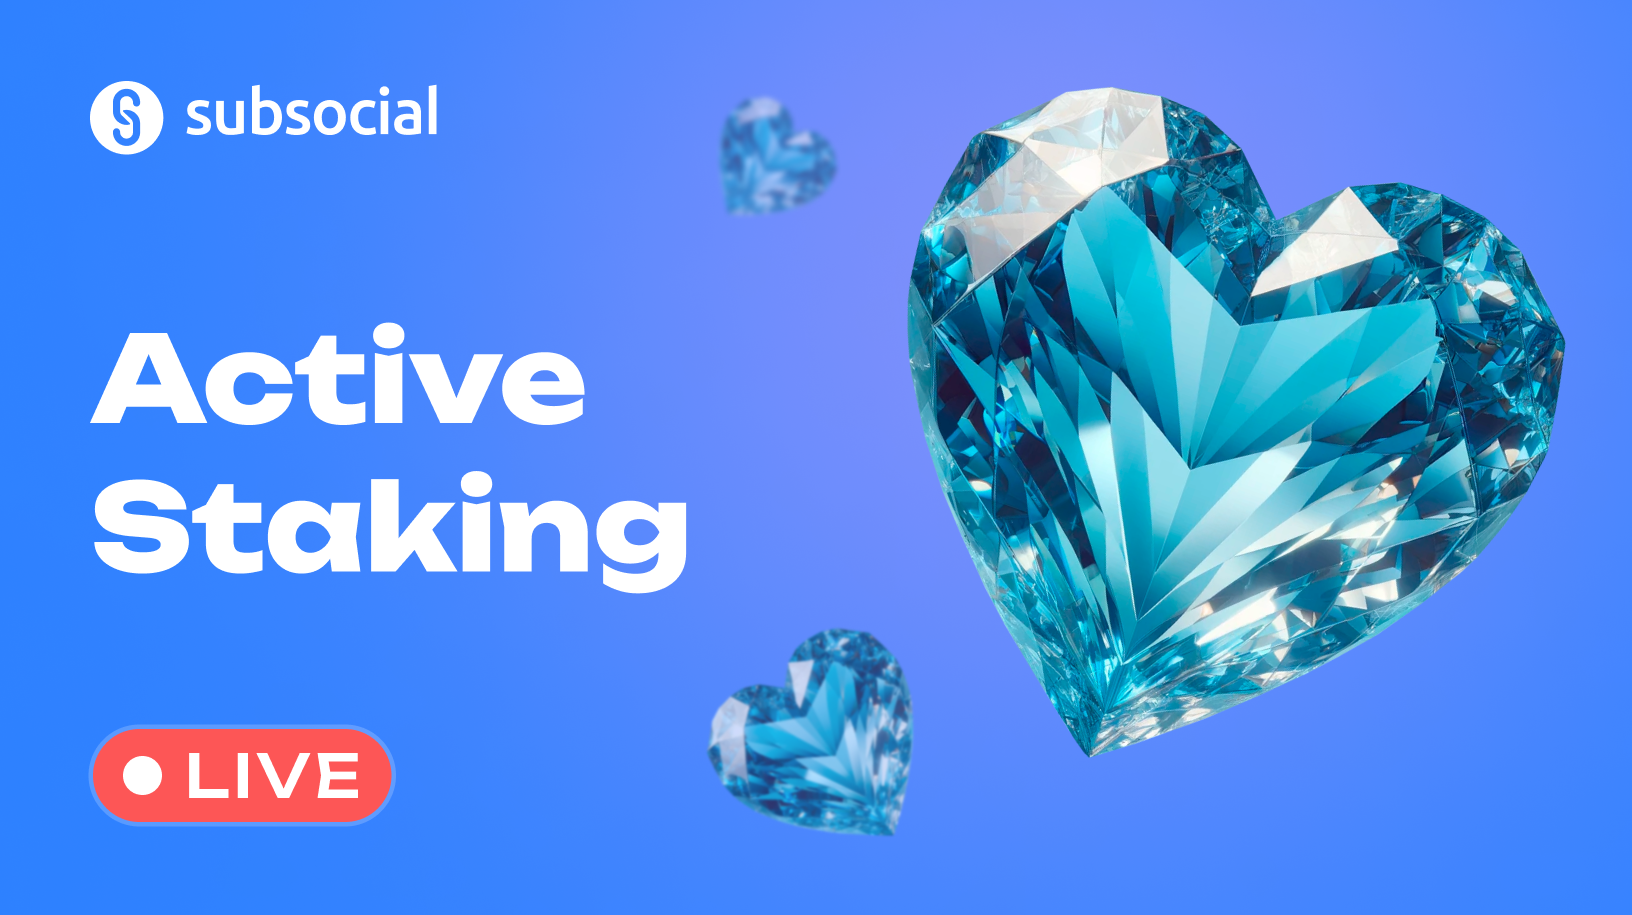 Get Rewarded For Your Network Activity With Subsocial's New Active Staking System!